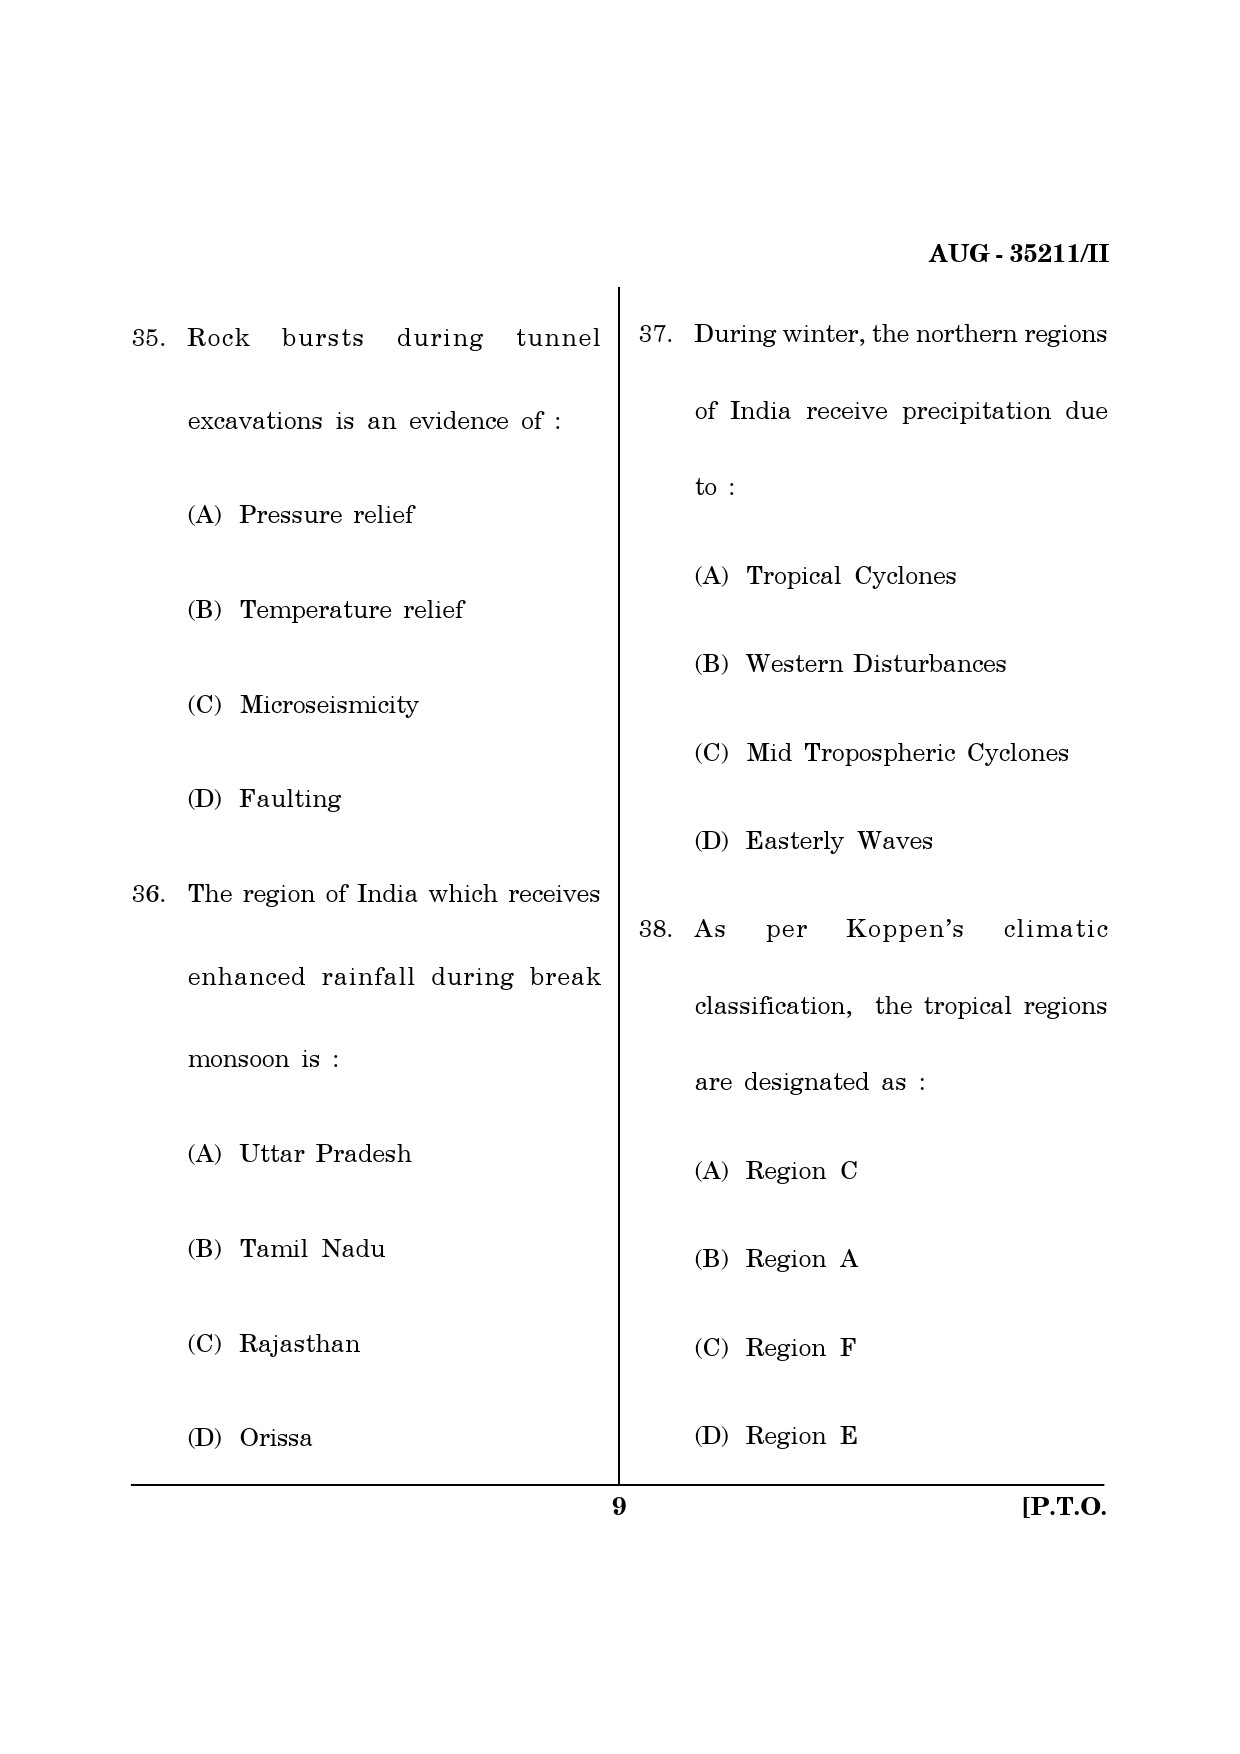 Maharashtra SET Earth Atmospheric Ocean Planetary Science Question Paper II August 2011 9